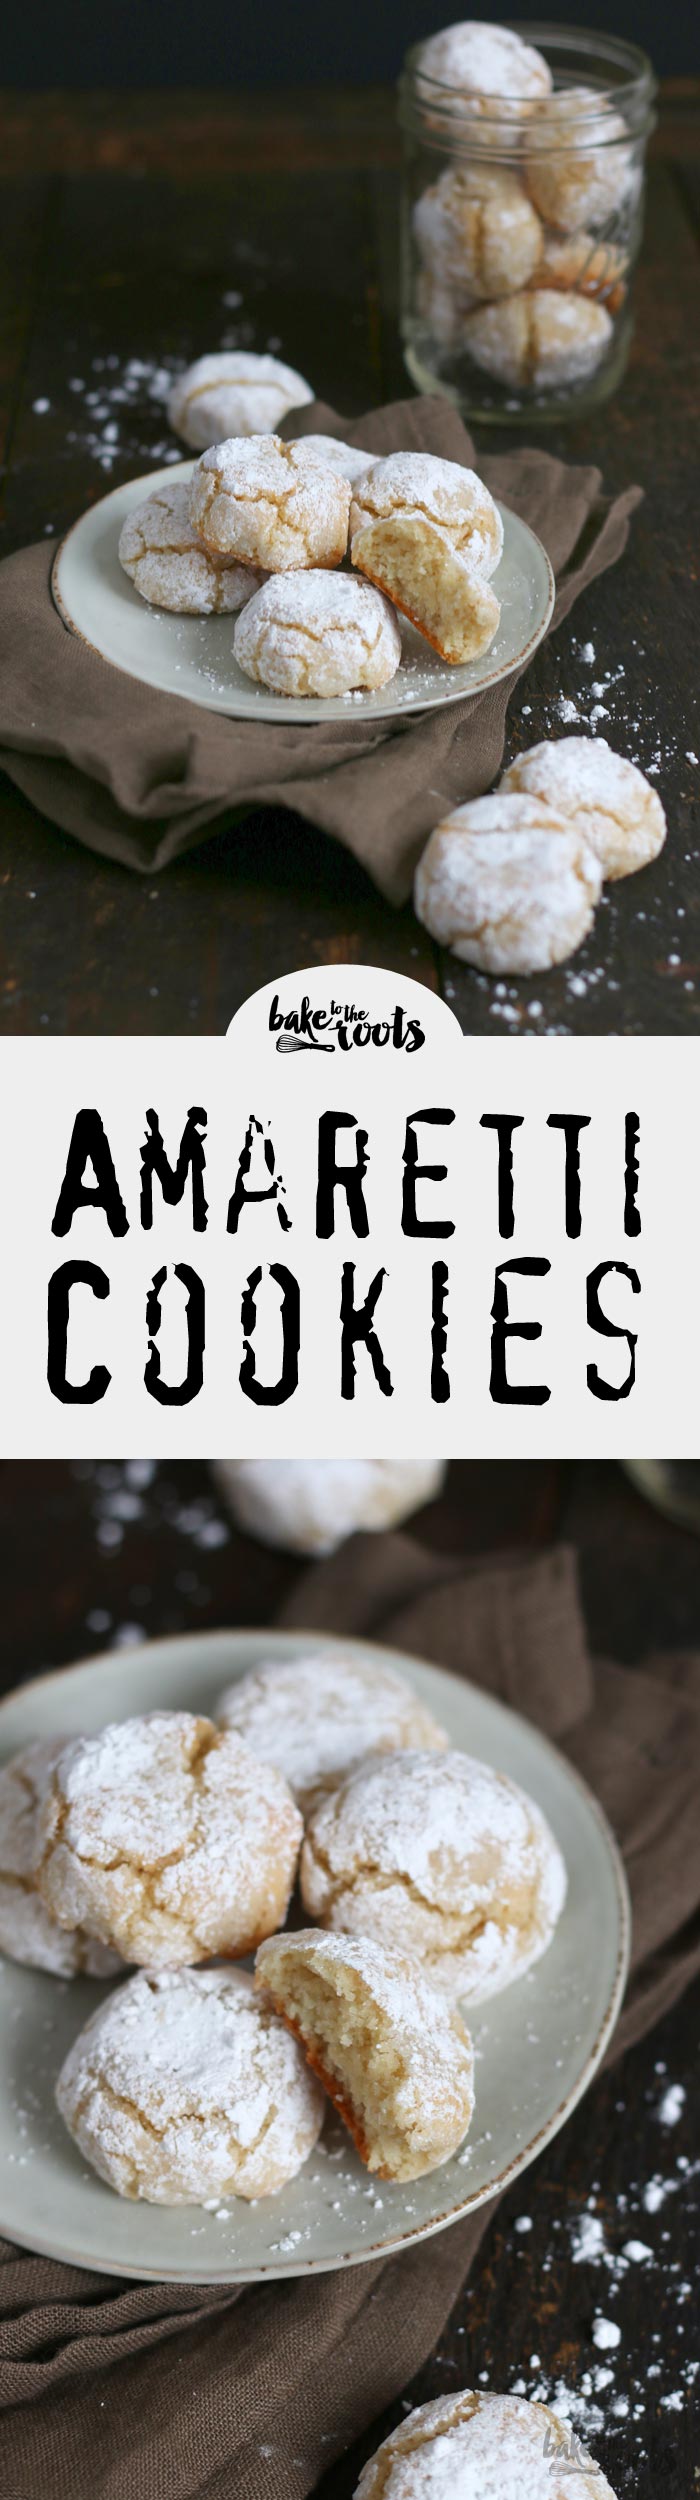 Delicious Almond Cookies aka. Amaretti – Crunchy on the outside, soft inside | Bake to the roots